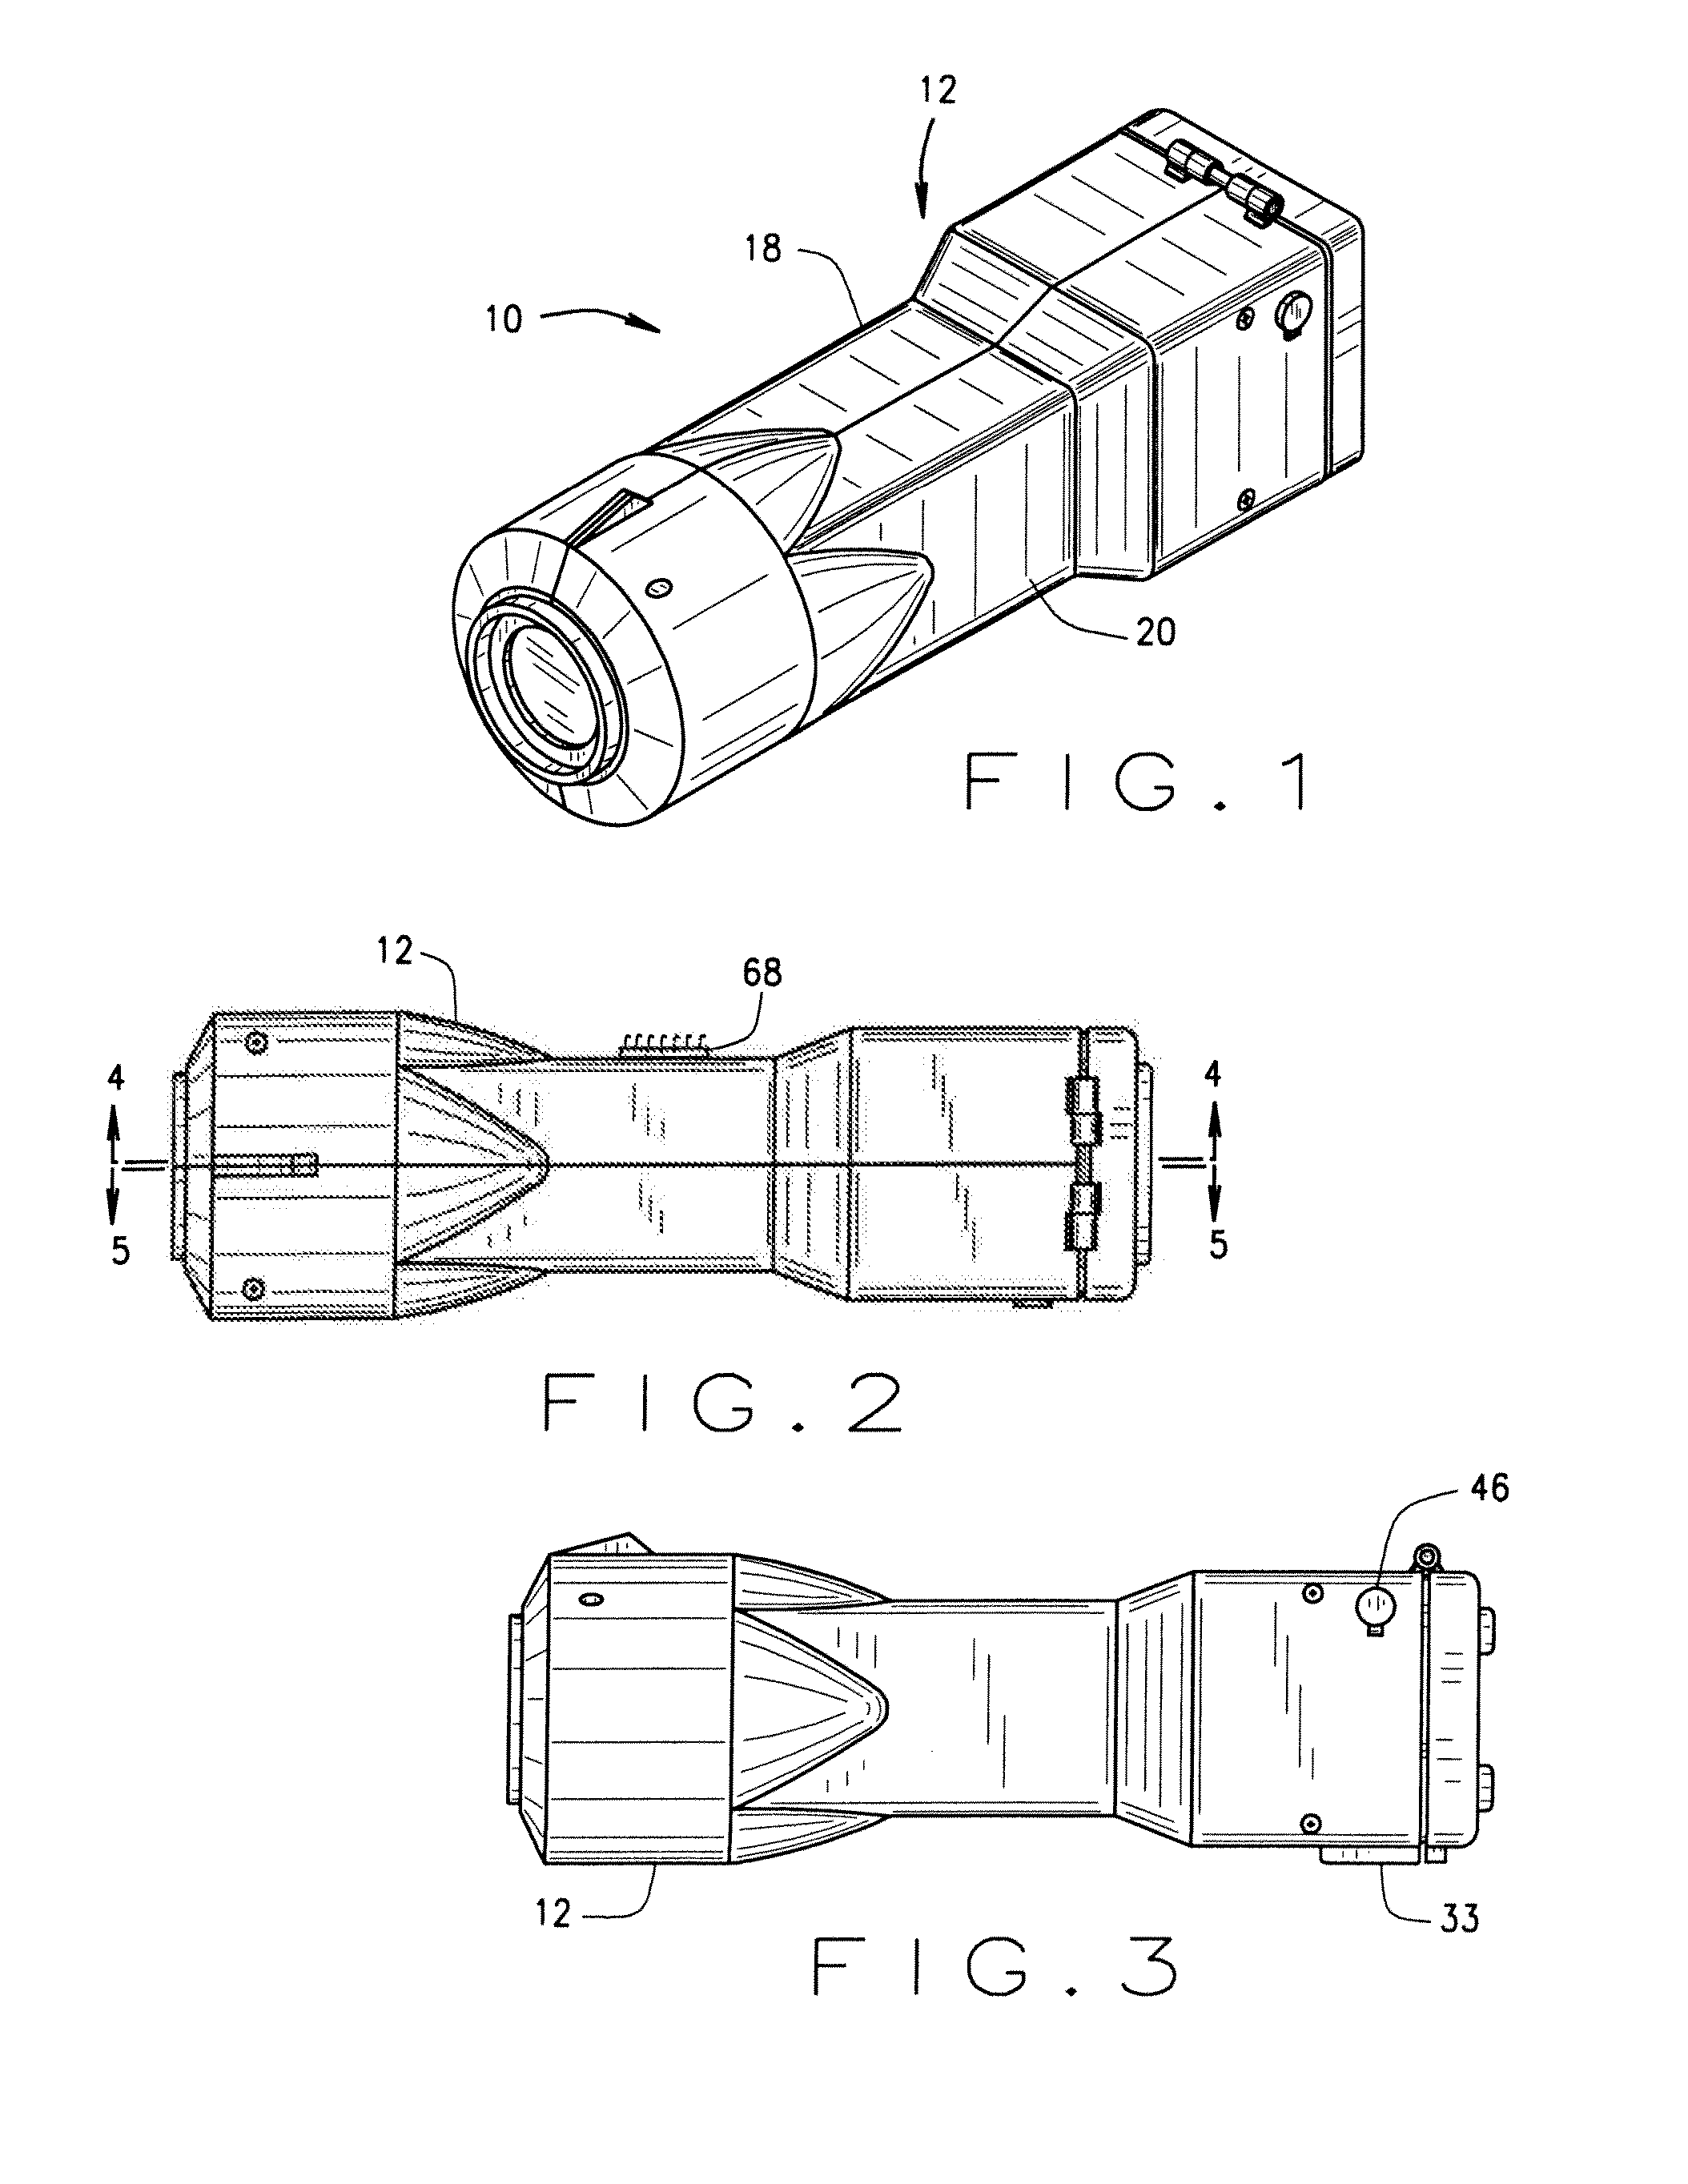 Vibration resistant camera for mounting to object